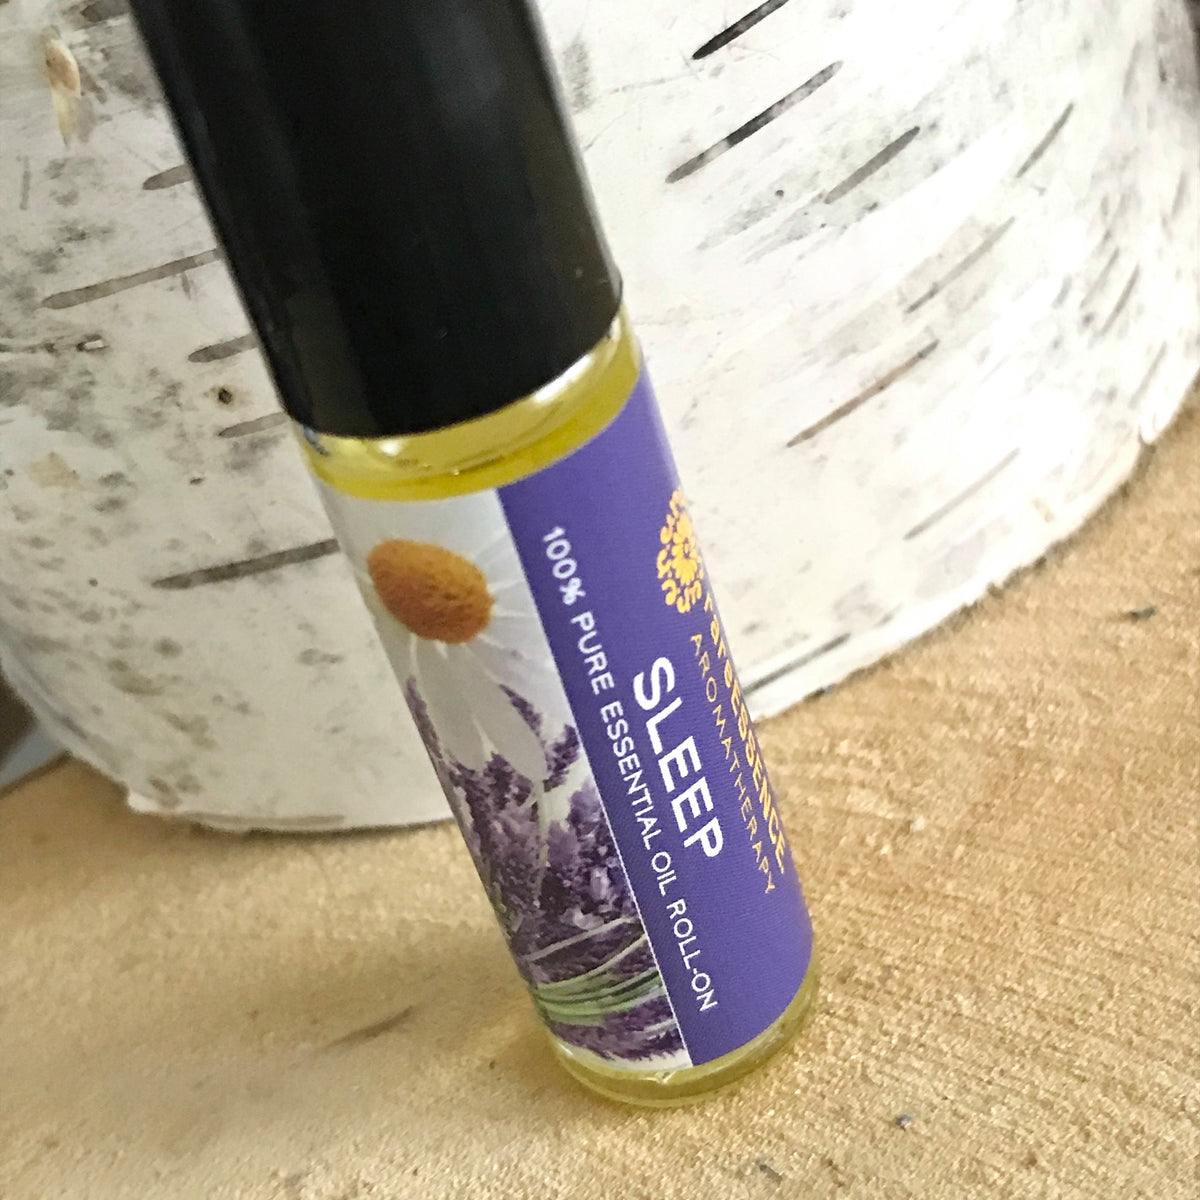 Sleep essential oil roll contains ingredients like lavender, sage, chamomile, and cedarwood to help you fall asleep easier. TSA compliant so you can even fall asleep when you're away from home!